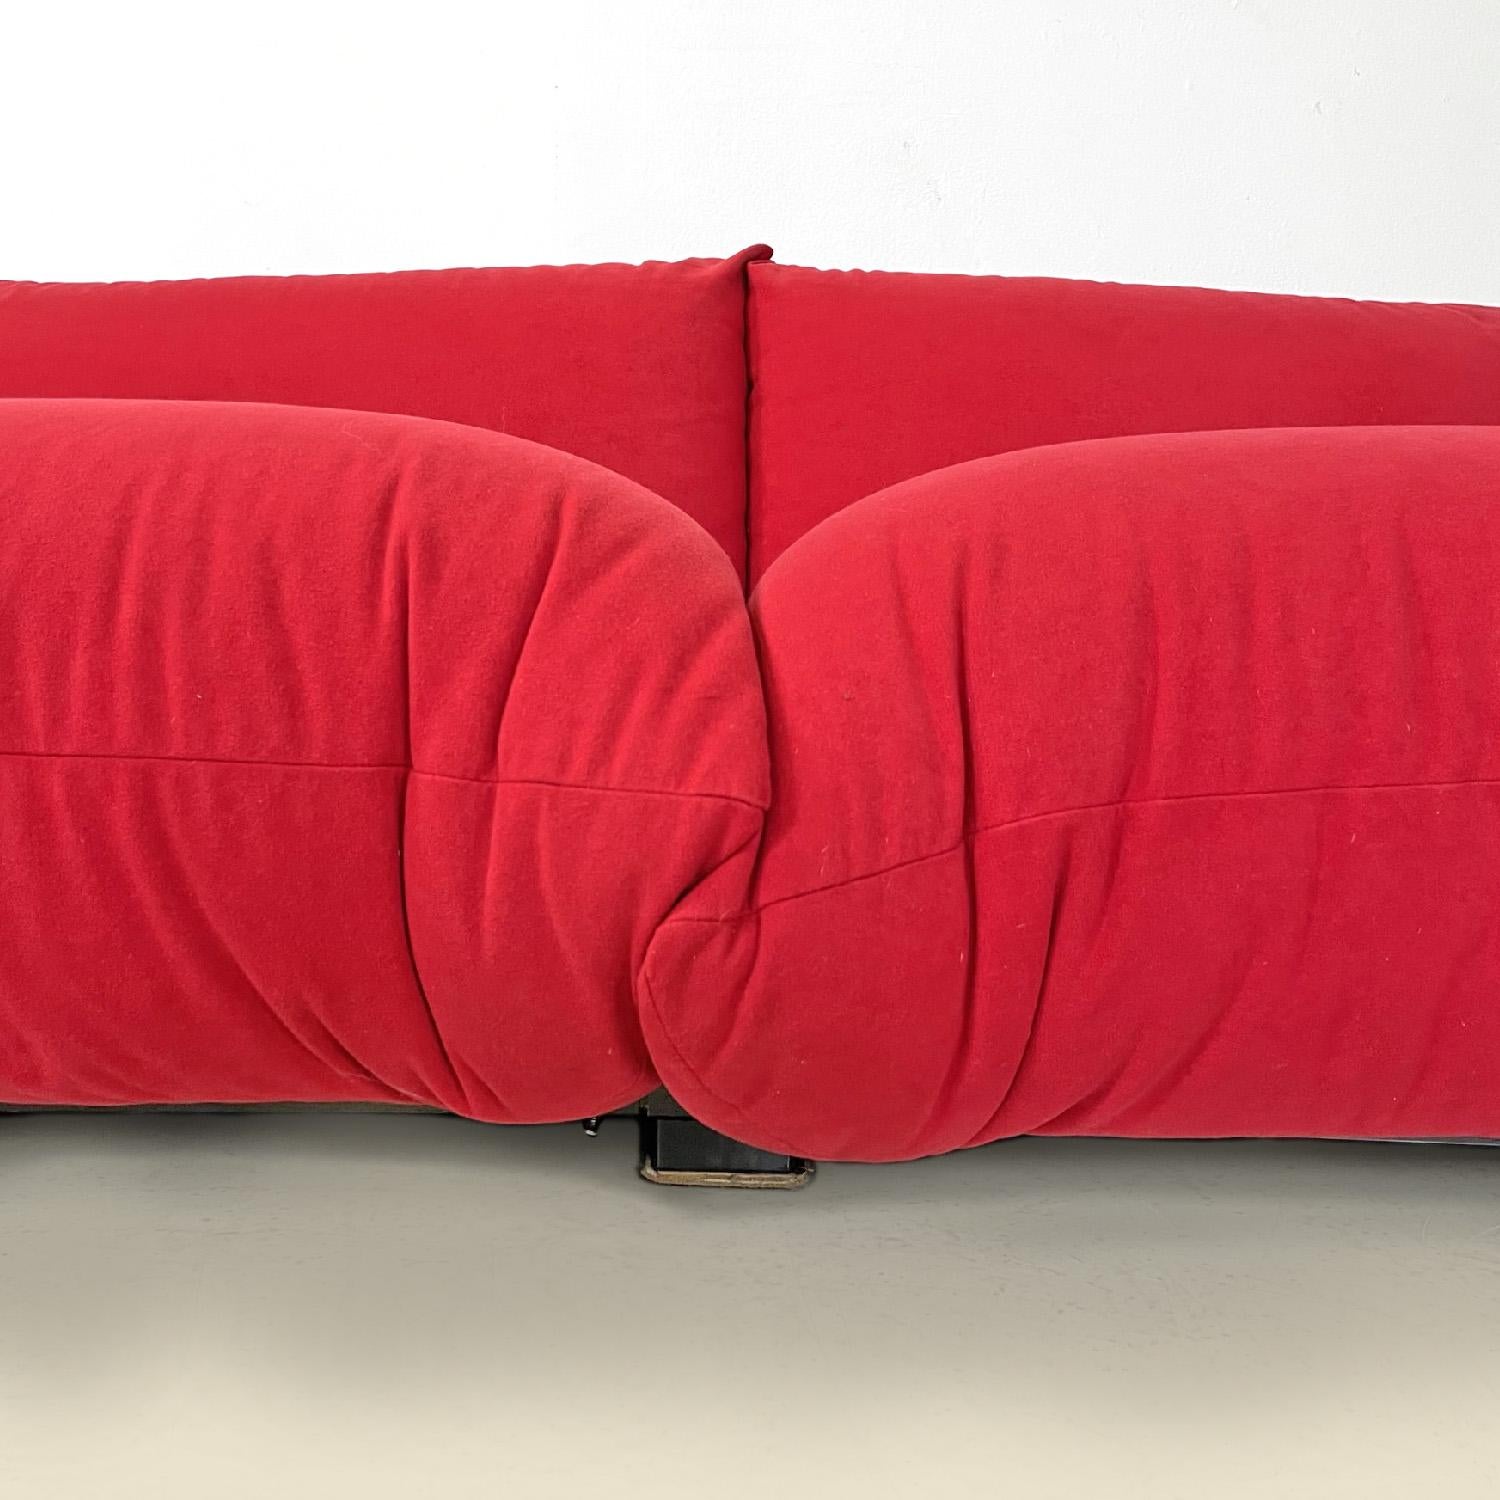 Late 20th Century Italian modern red sofas Marenco by Mario Marenco for Arflex, 1970s For Sale